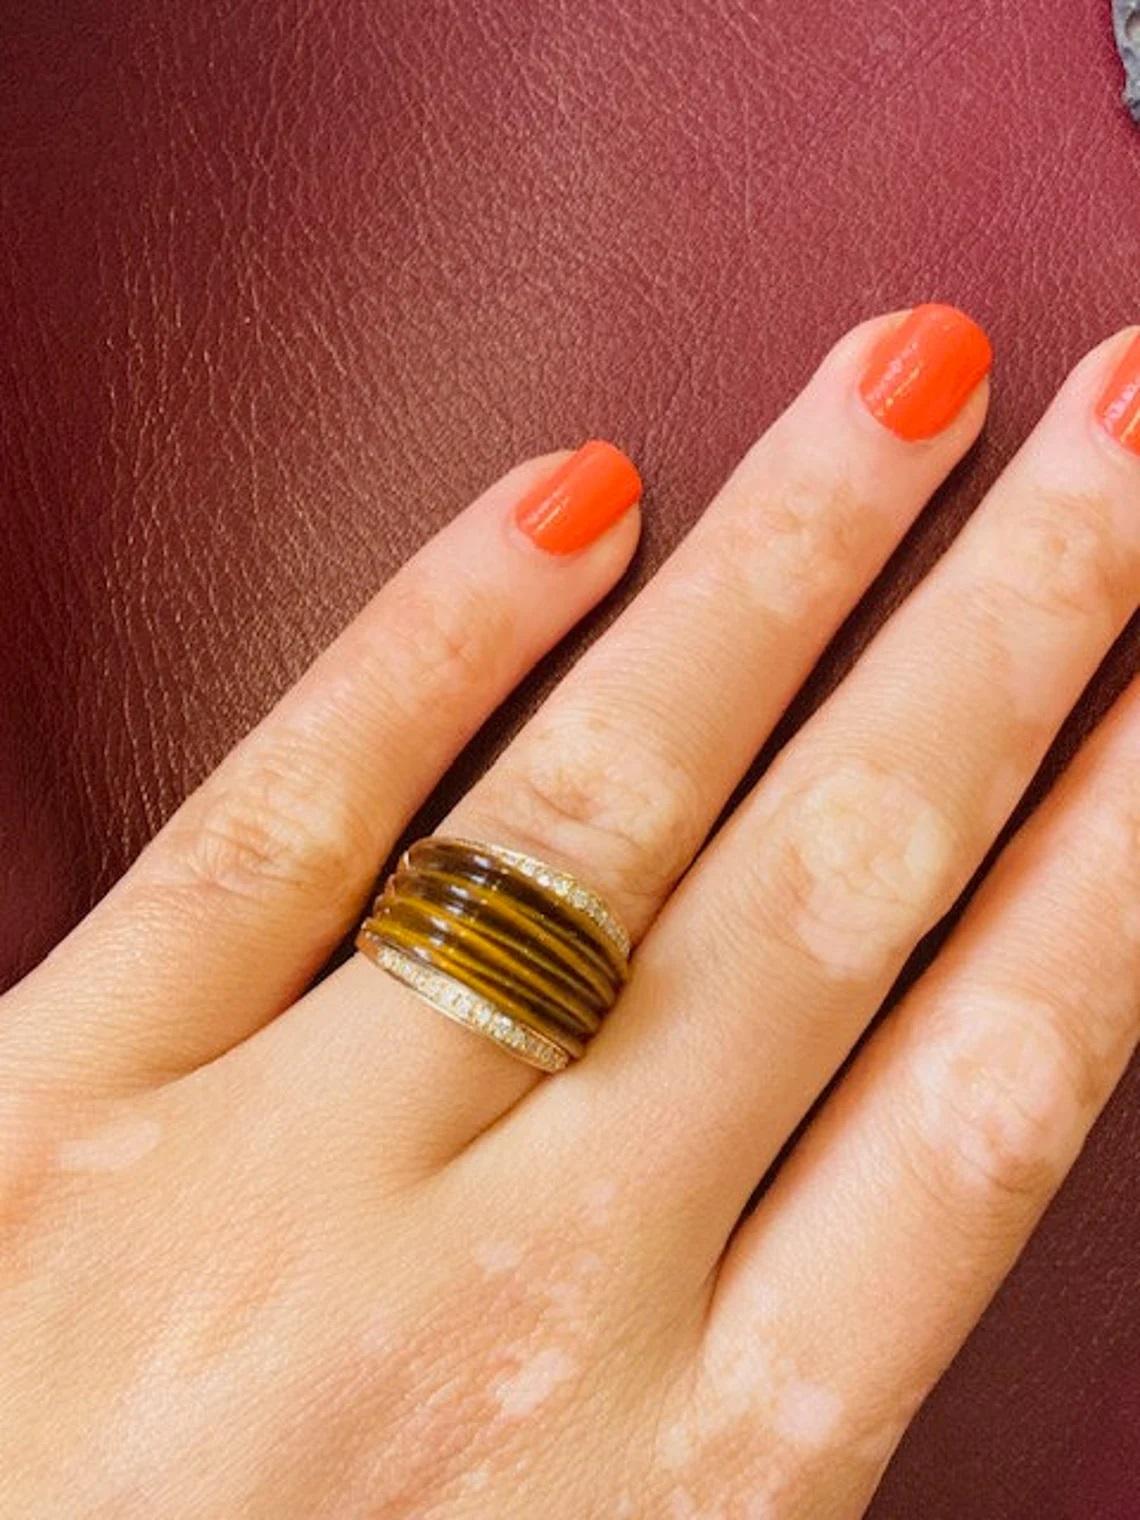 Vintage 14k Gold Ridged Tiger's Eye and Diamond Ring, Limited Edition

This ridged tiger's eye ring sandwiched between two trails of sparkling white diamonds is perfect for everyday wear or for a special occasion. It is guaranteed to add some